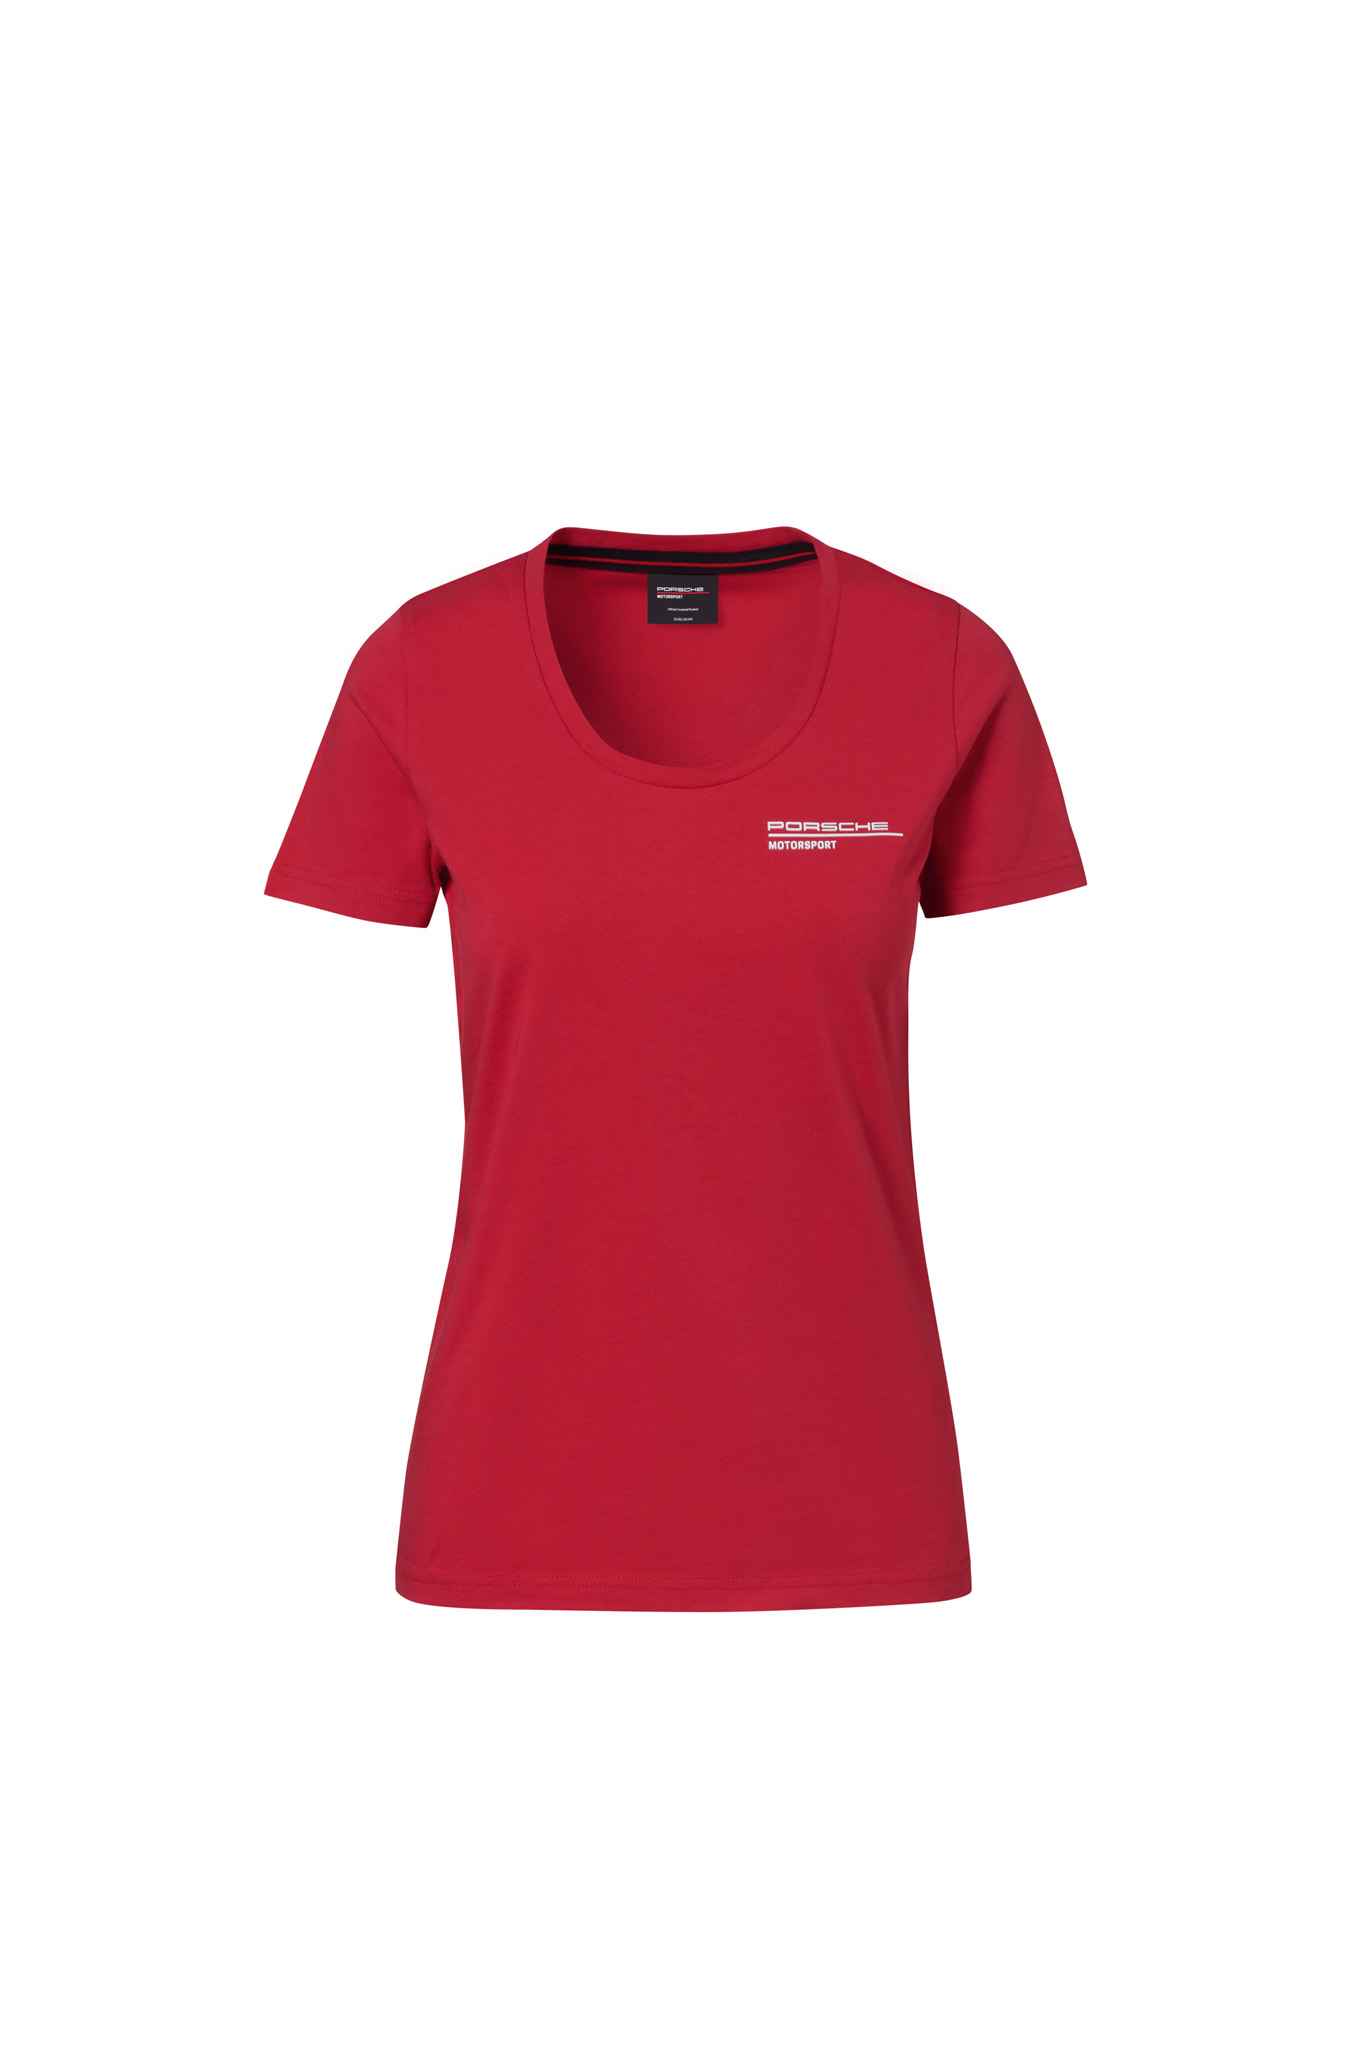 Motorsport Fanwear Collection, Women's Red T-Shirt zoom